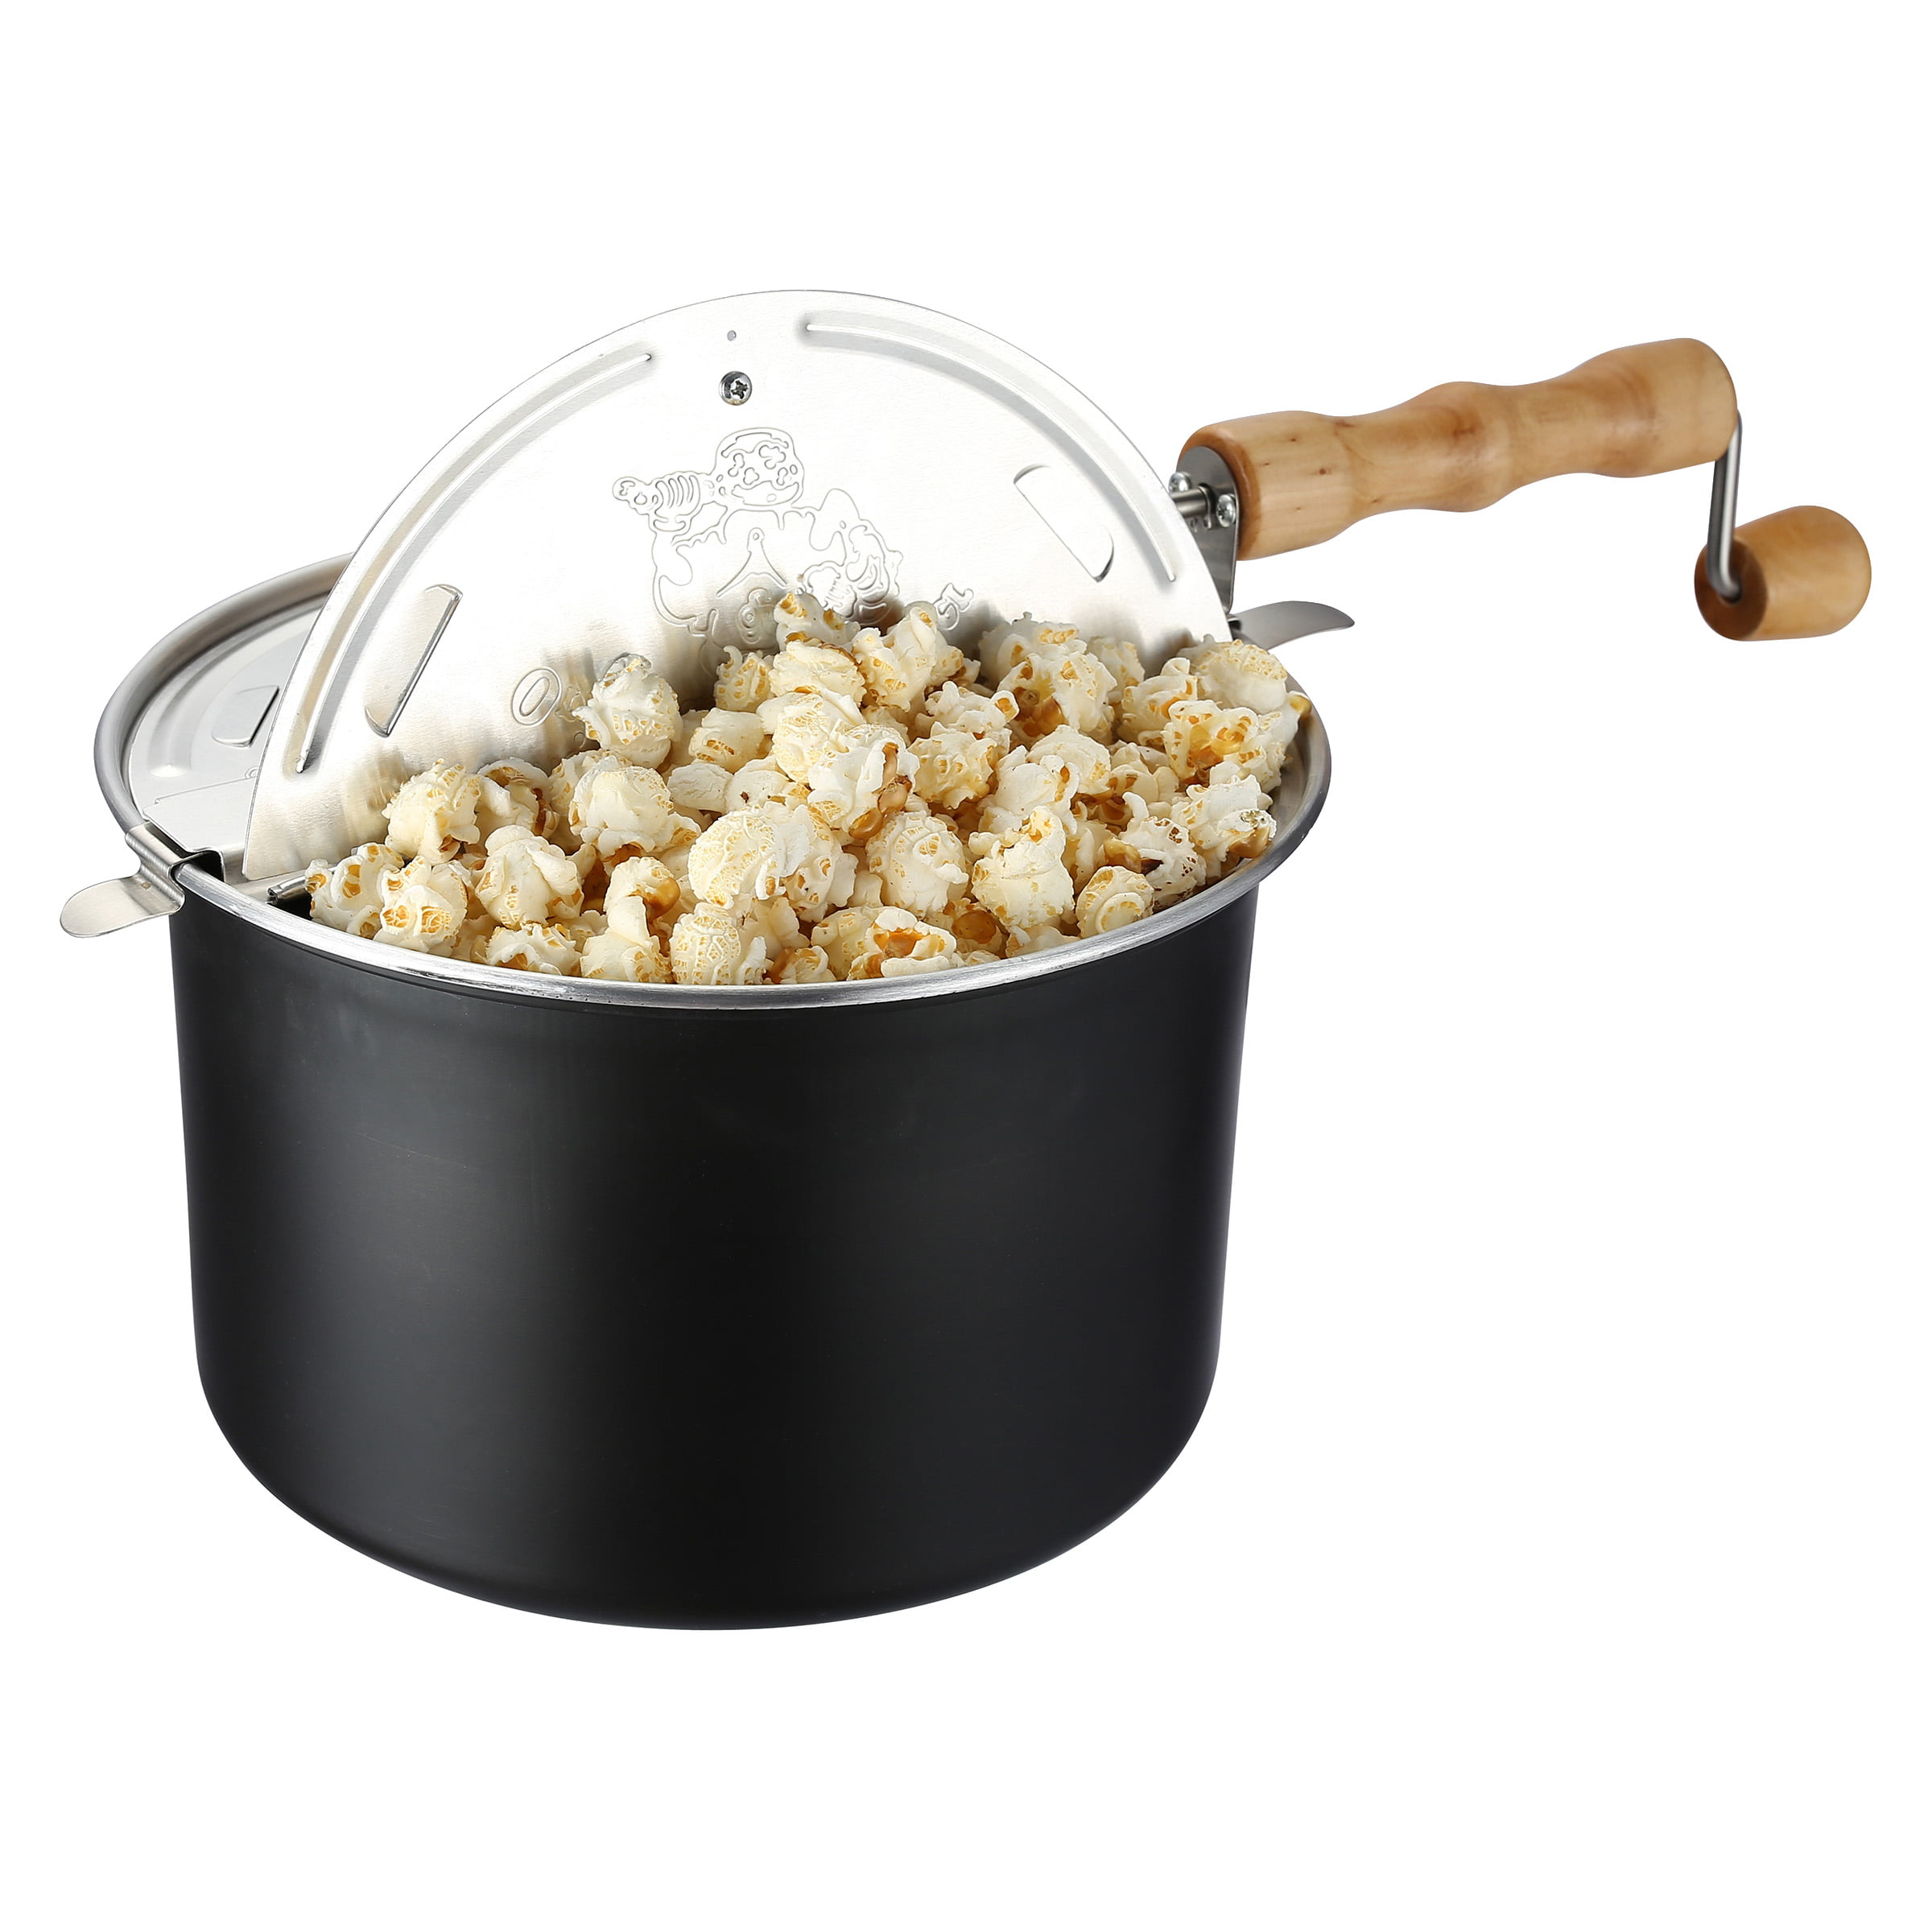 Whirley-Pop Stainless Steel Stovetop Popcorn Popper with Real Theater  All-Inclusive Popping Kit - Silver